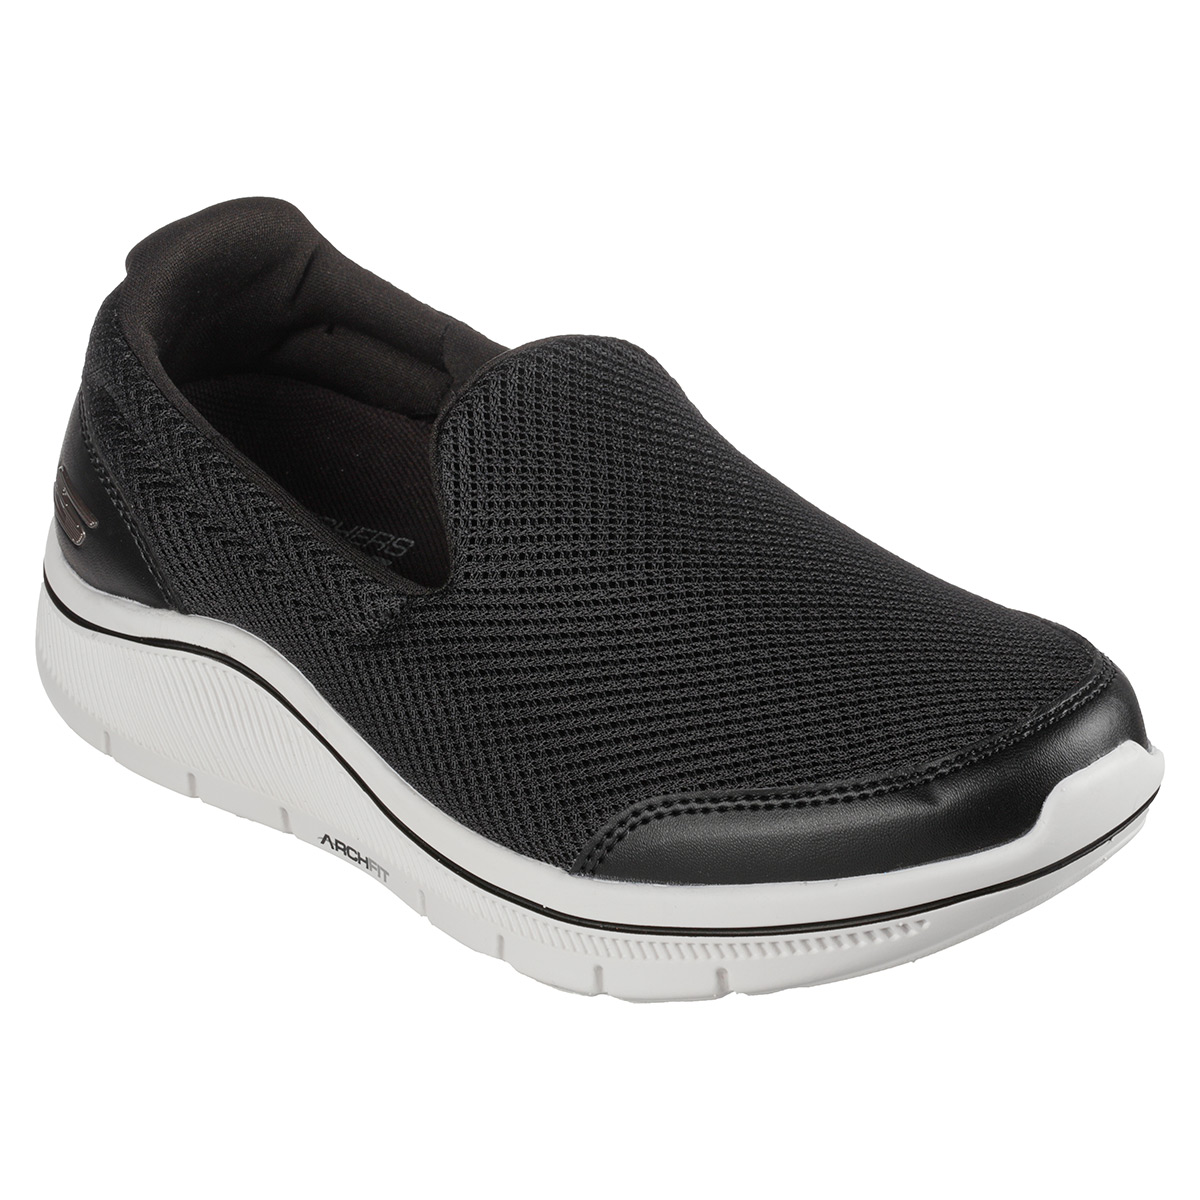 Skechers Ladies GO Arch Fit Walk Spikeless Golf Shoes from american golf